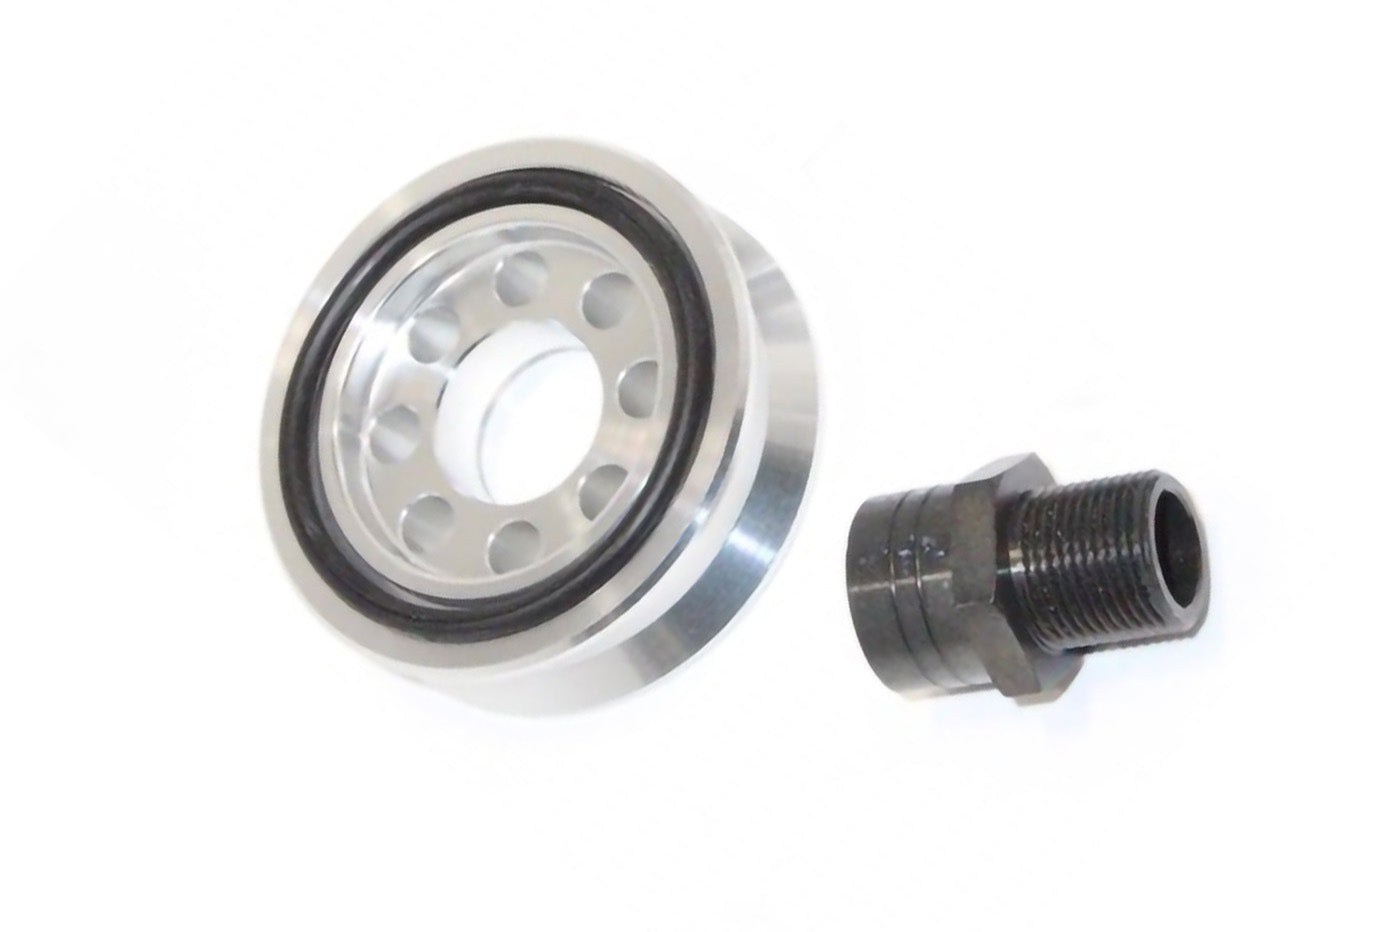 Optional 23mm Spacer for Oil Filter Block / Sensor Adapters  - M20x M20